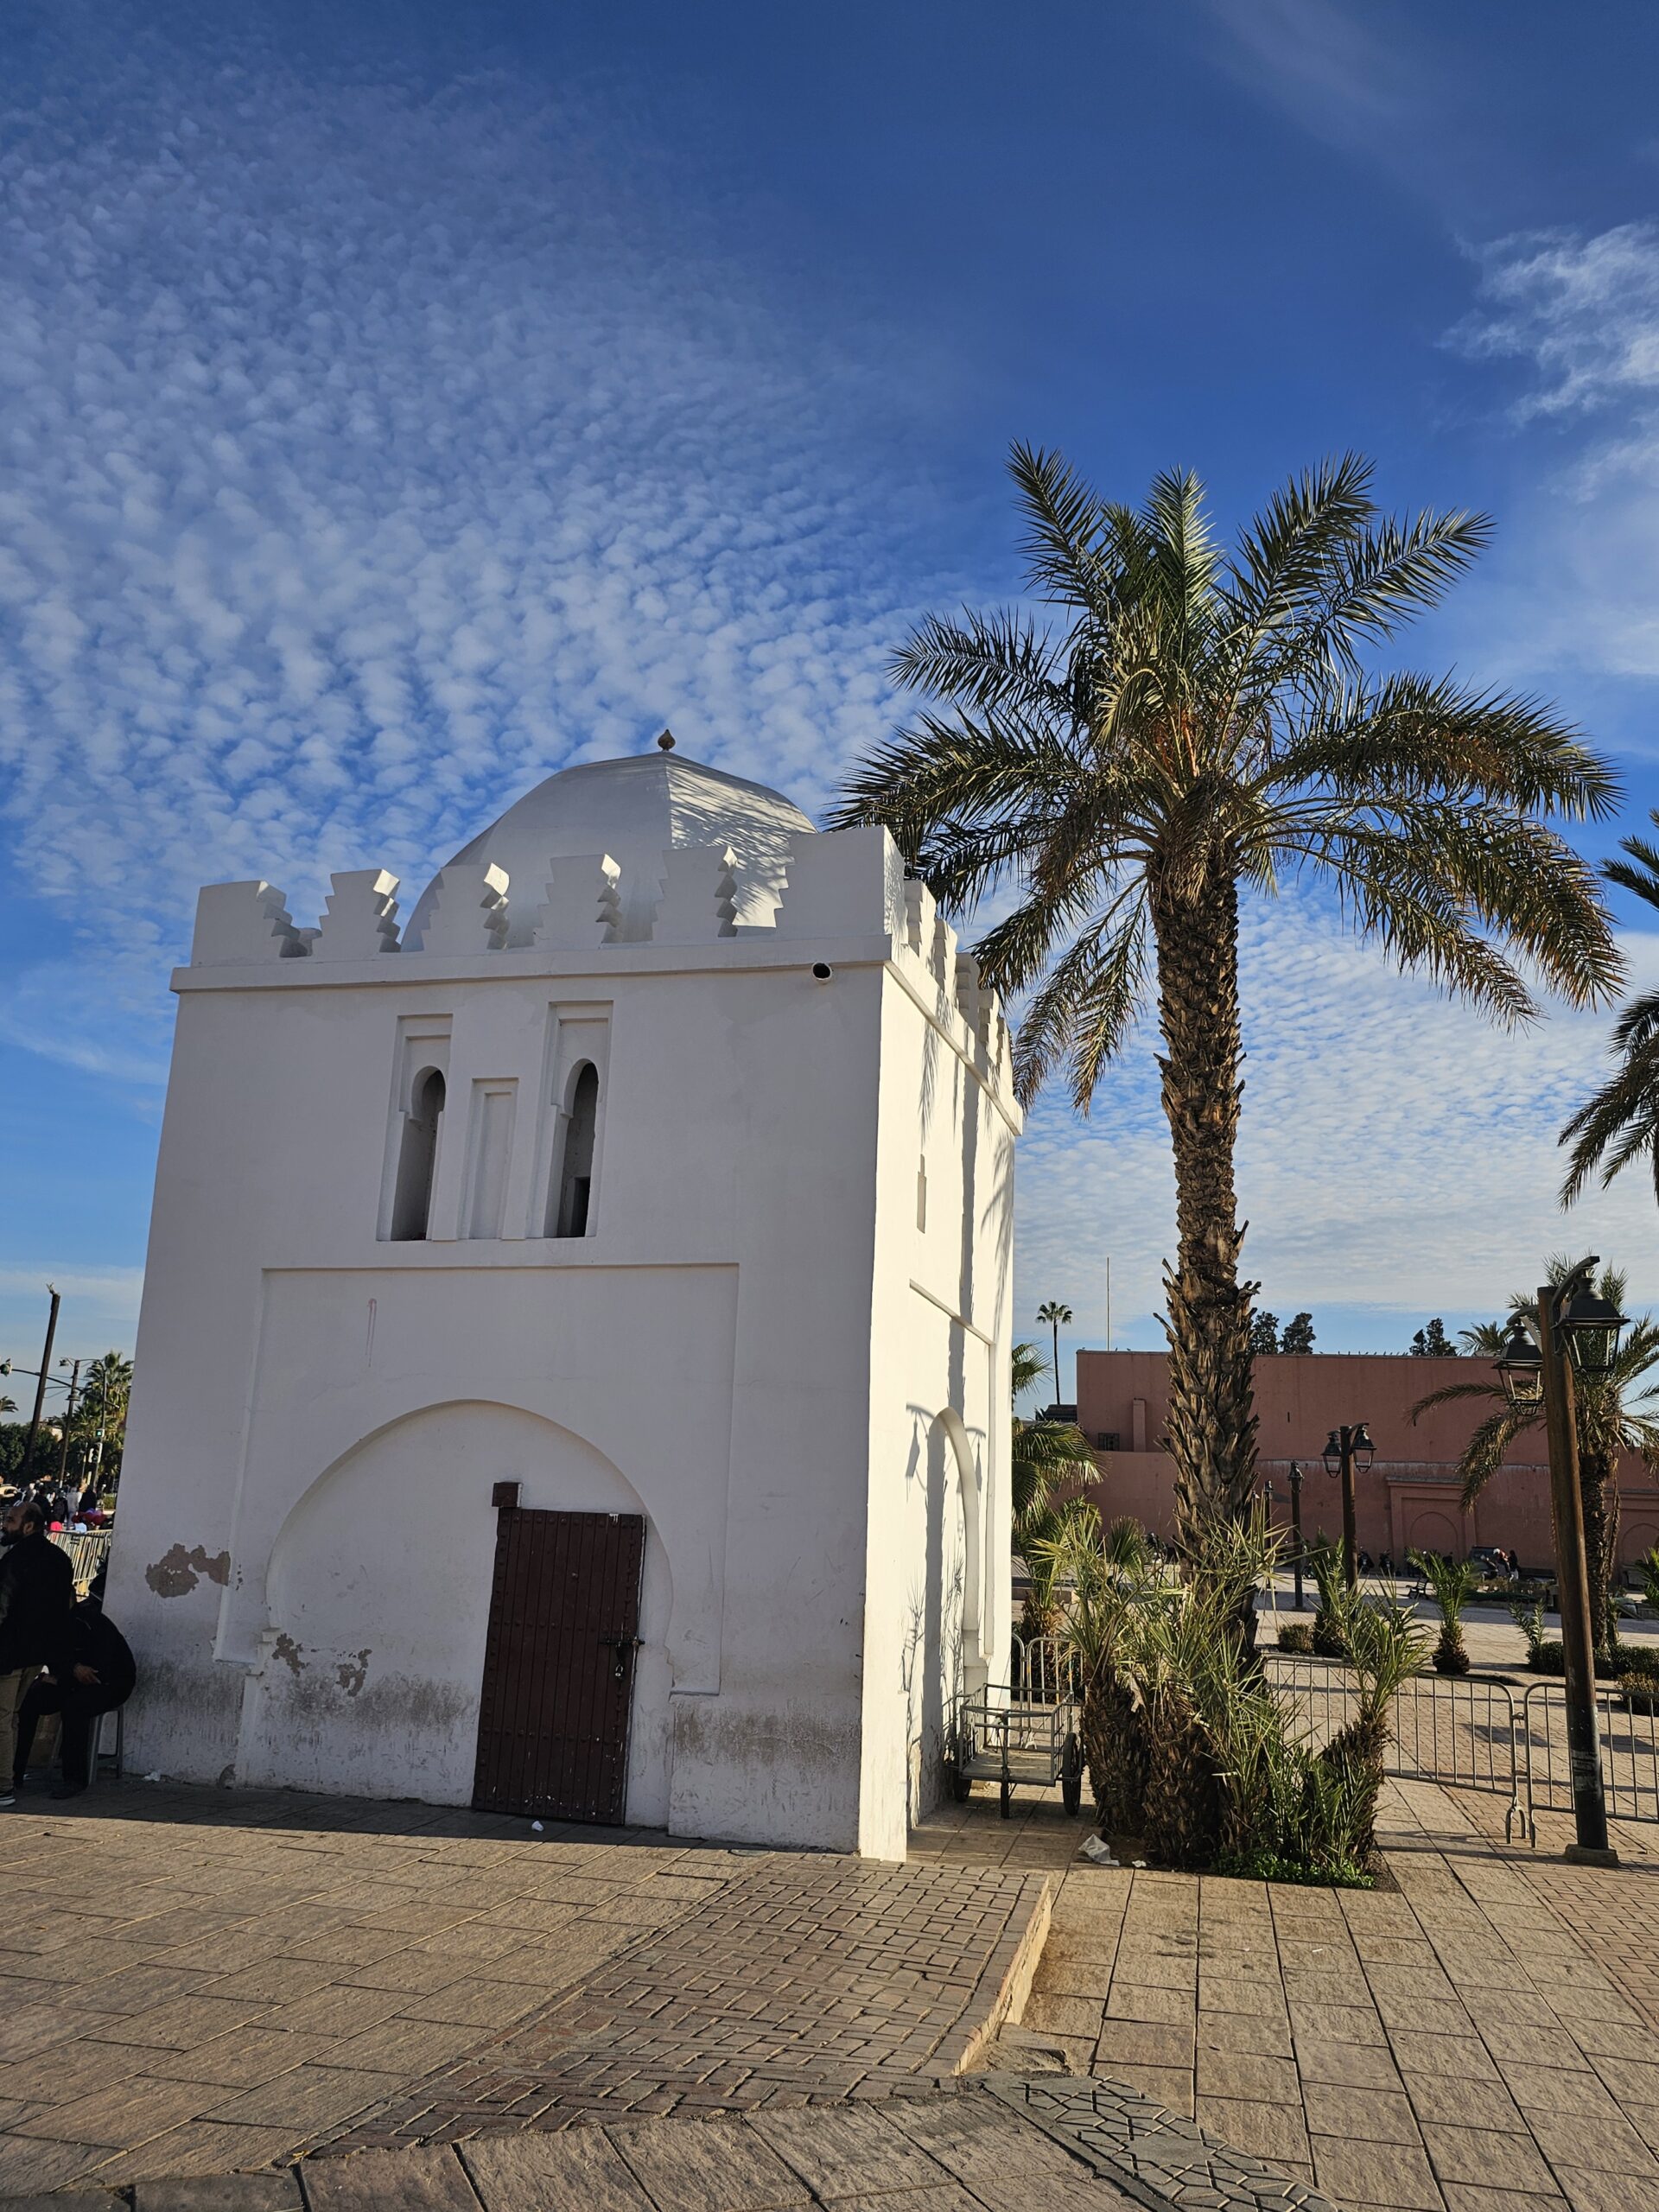 Koubba of Lalla Zohra near Koutoubia Mosque, Marrakesh. Image by 360onhistory.com